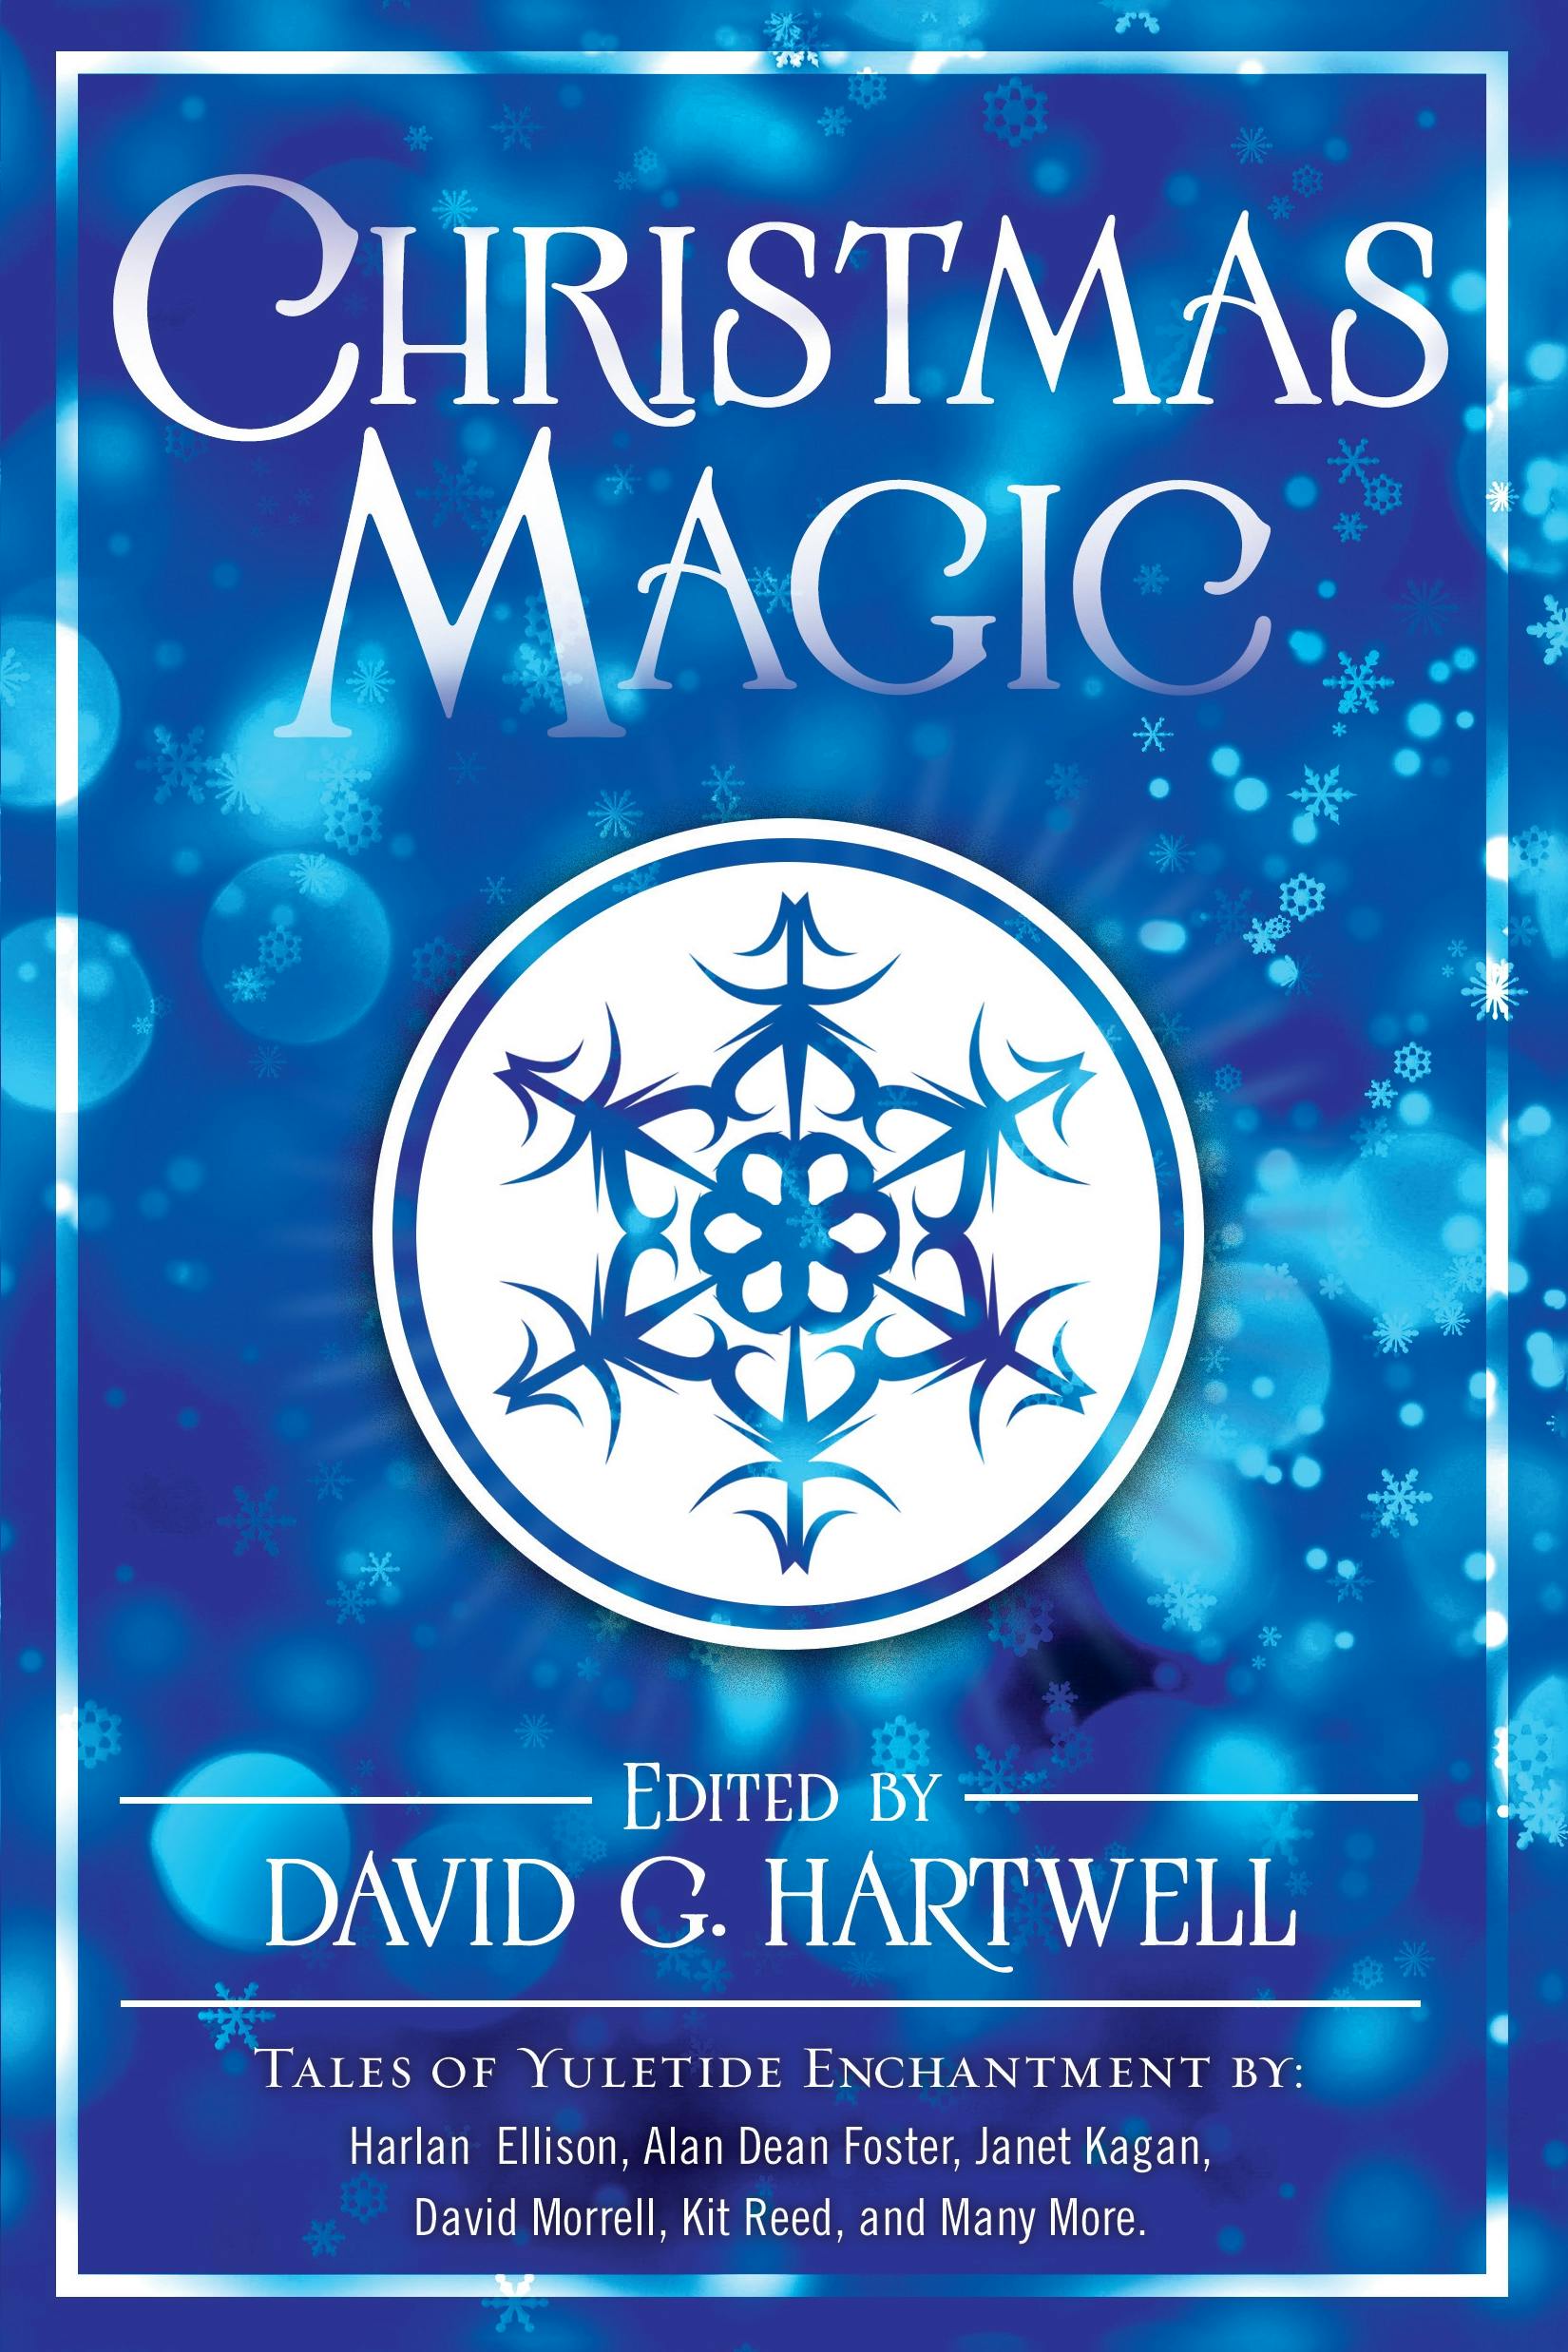 Cover for the book titled as: Christmas Magic